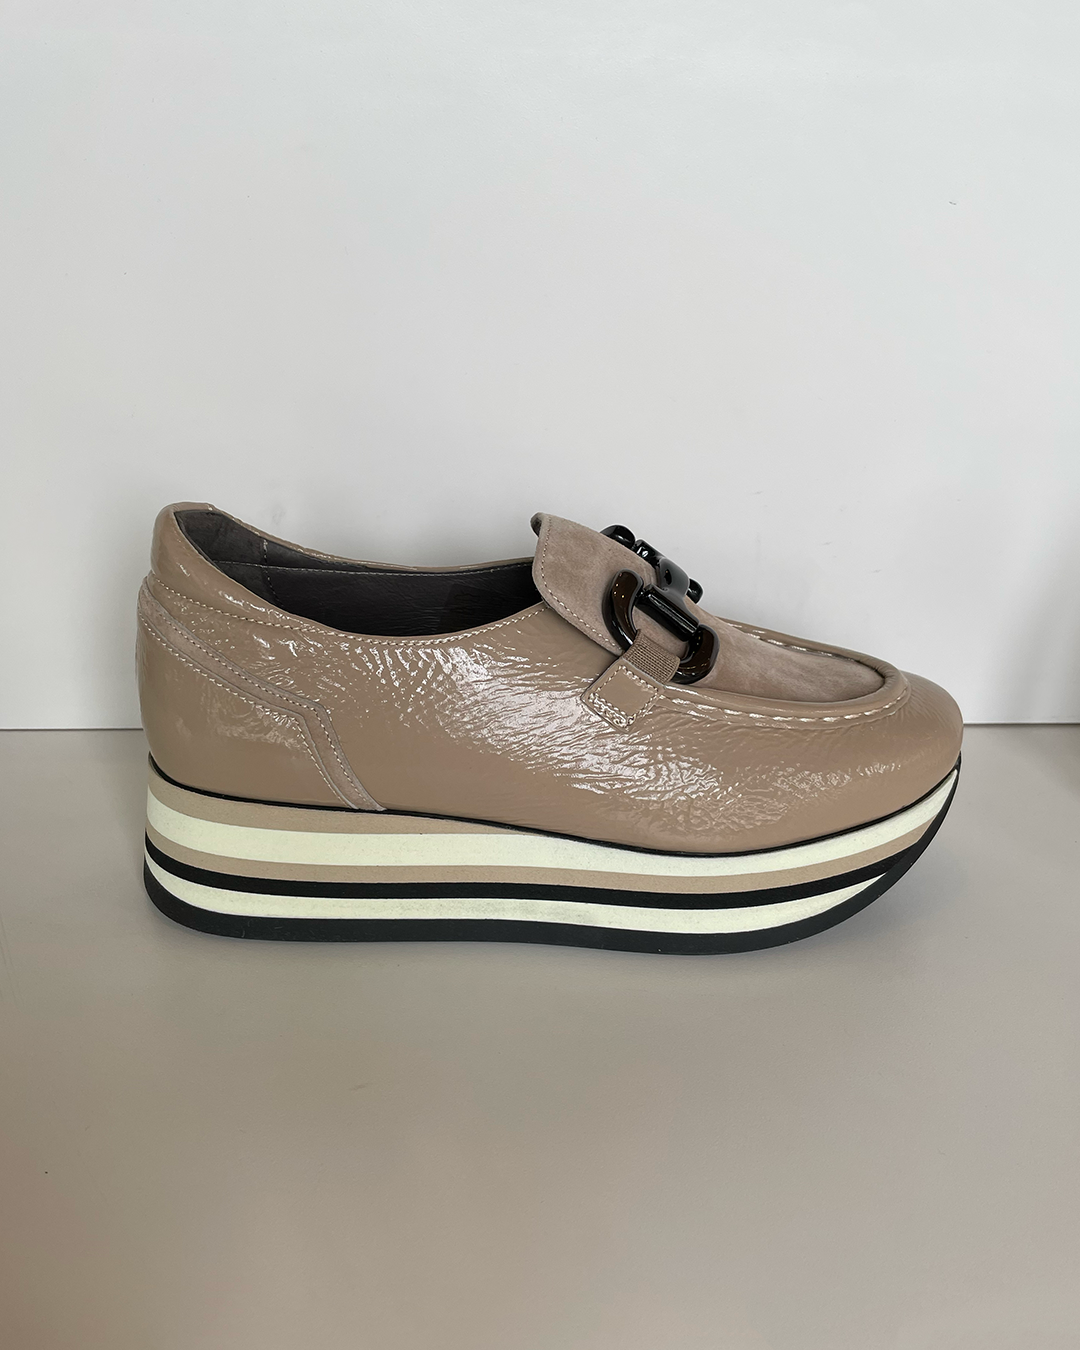 Deborah Kent's Boutique in South Tampa — Alanis Woven Leather Slip-On ...